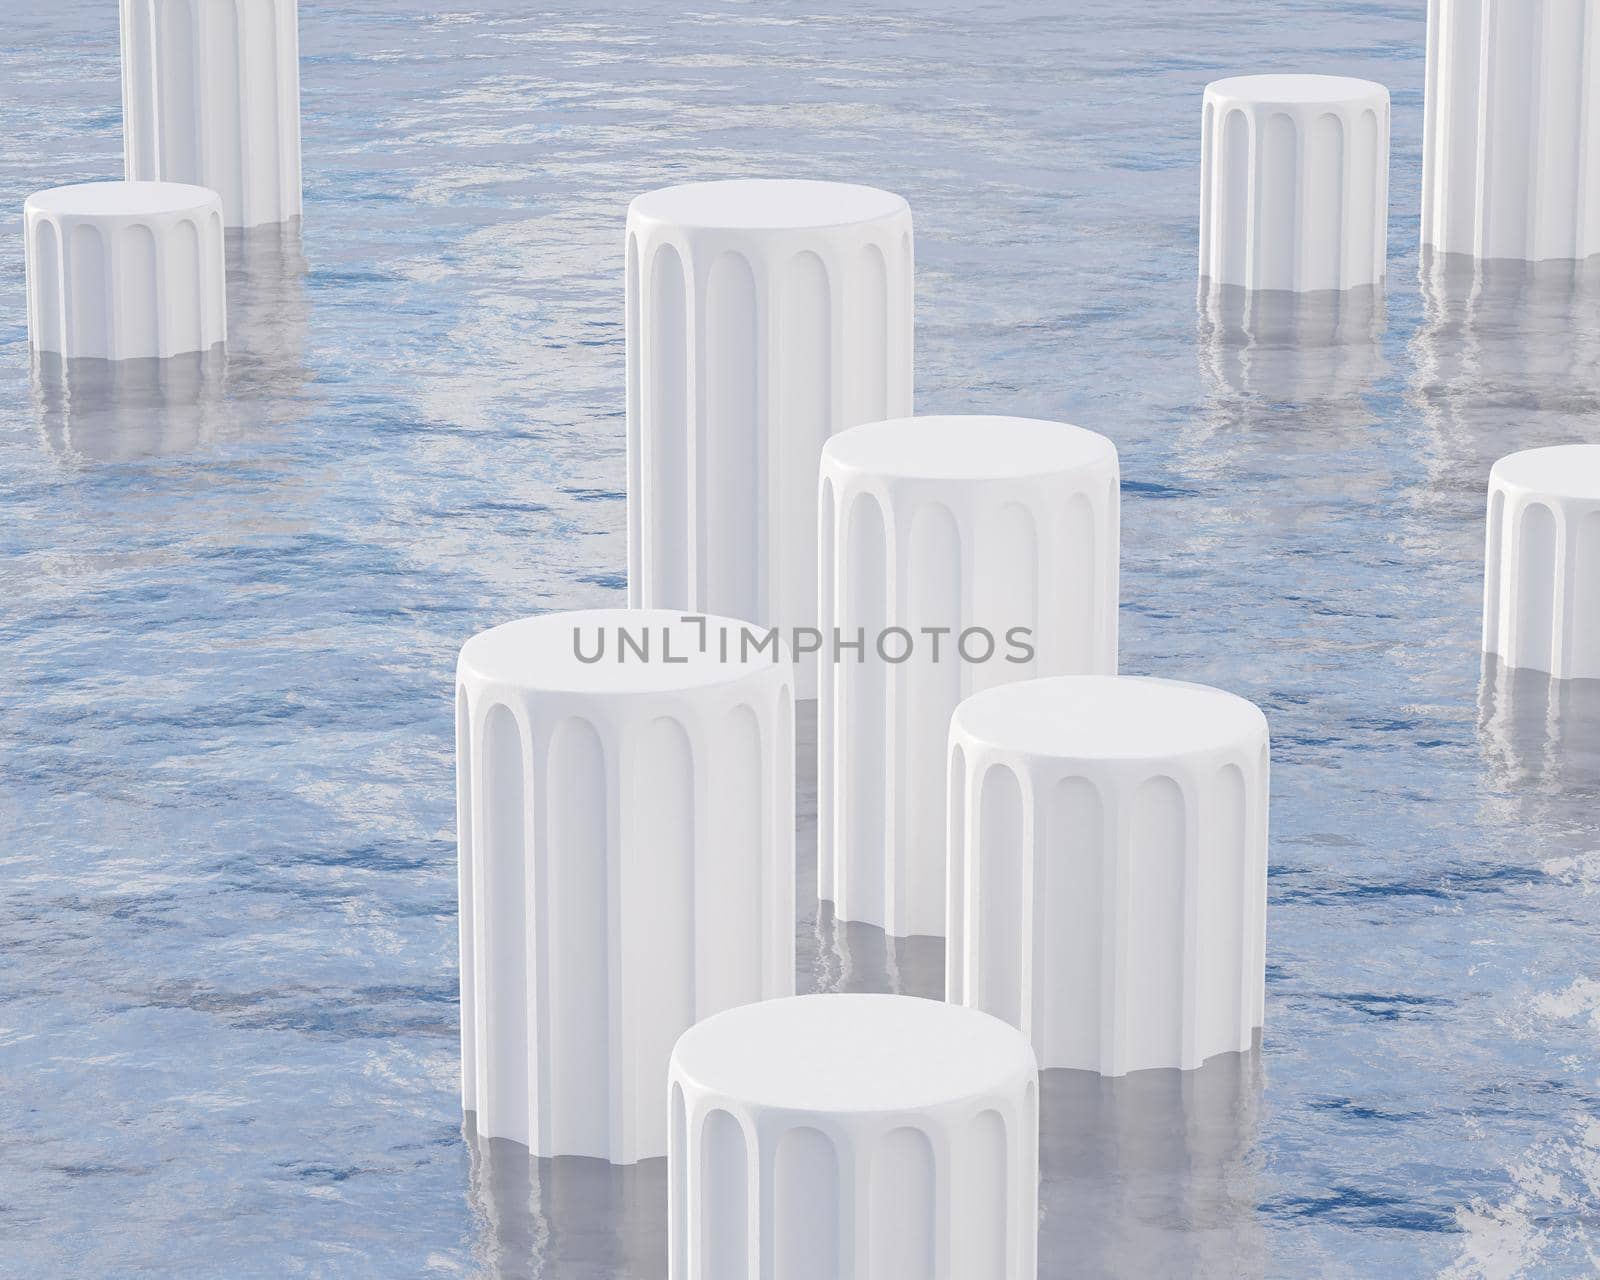 White pillar podiums or pedestals for products or advertising standing in sea or ocean with waves. Minimal 3d illustration render